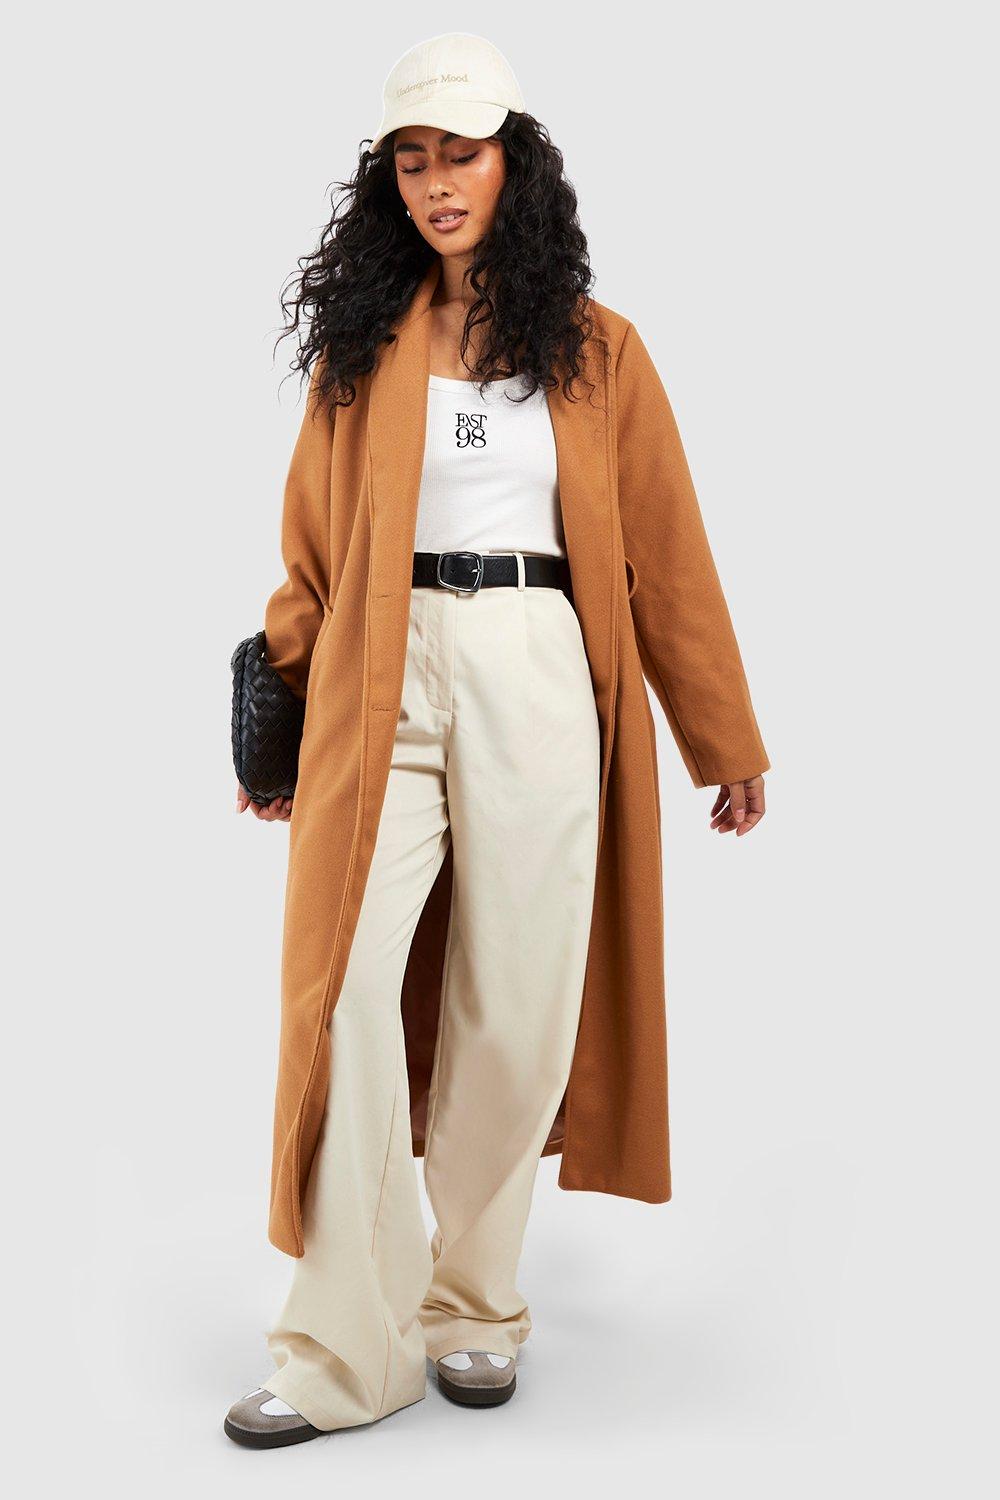 Boohoo Wool Look Coat In Camel / From a long camel coat like the ...